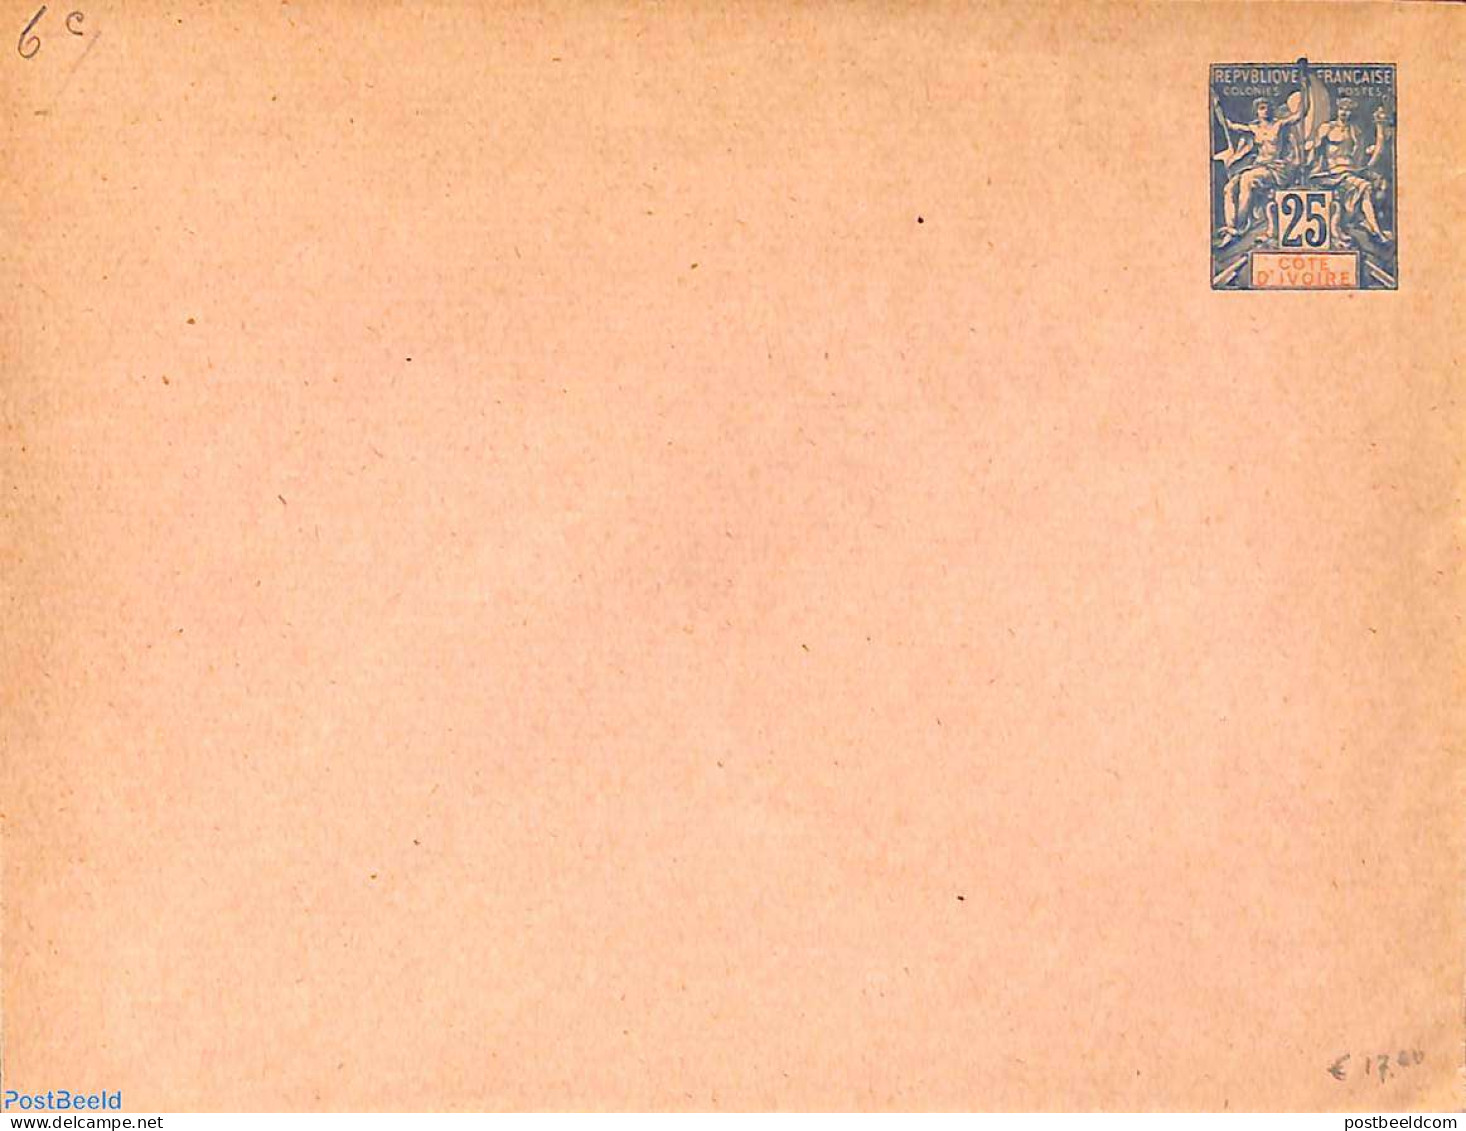 Ivory Coast 1900 Envelope 25c, With Control Number, Unused Postal Stationary - Covers & Documents